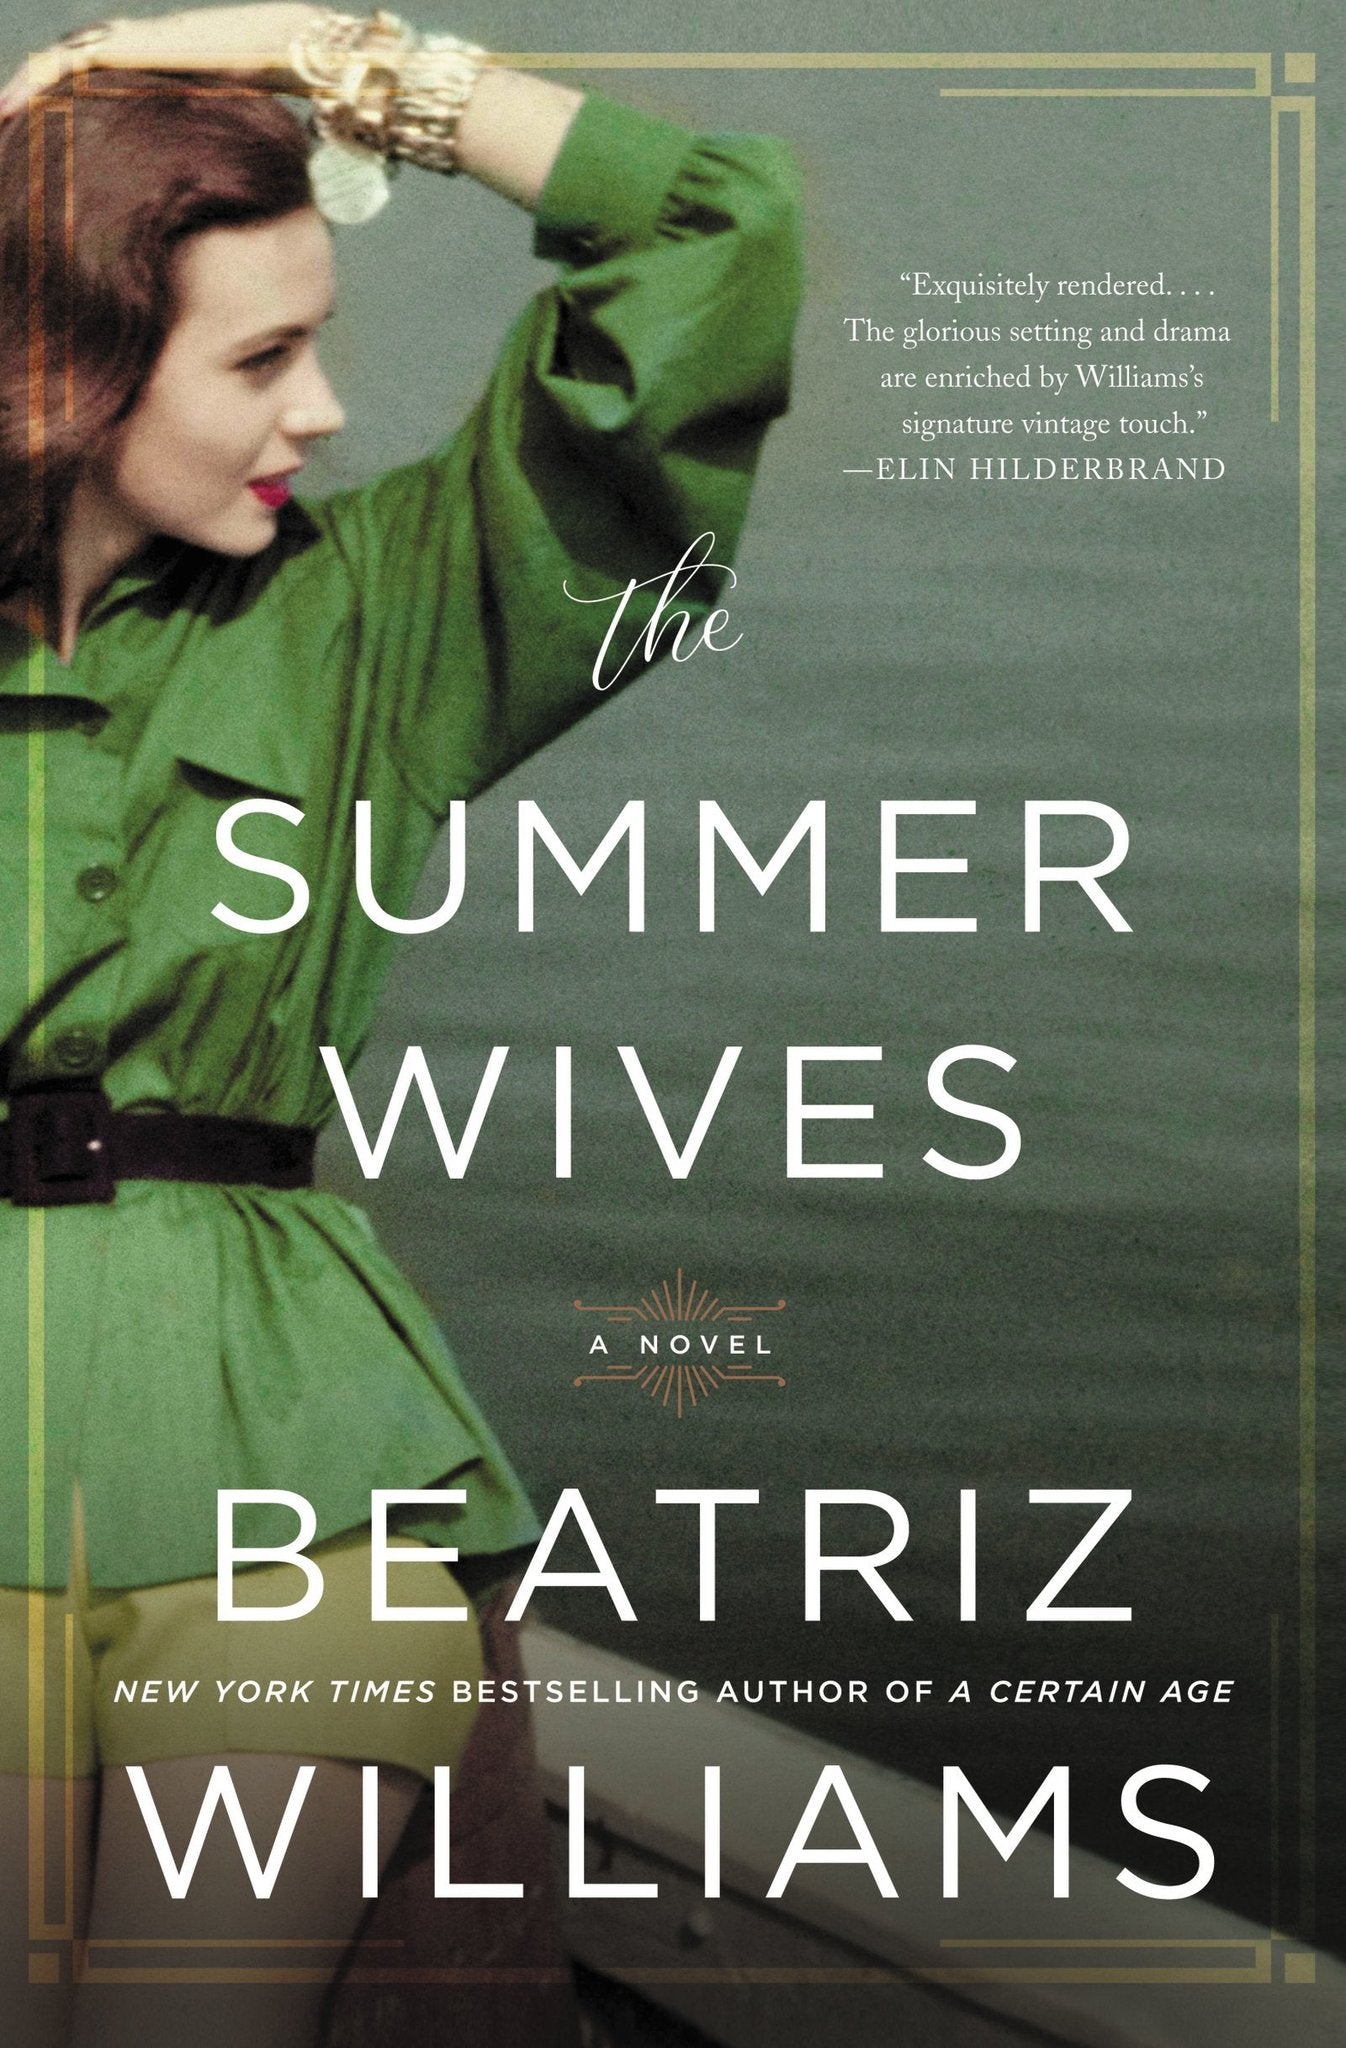 The Summer Wives by Beatrize Williams